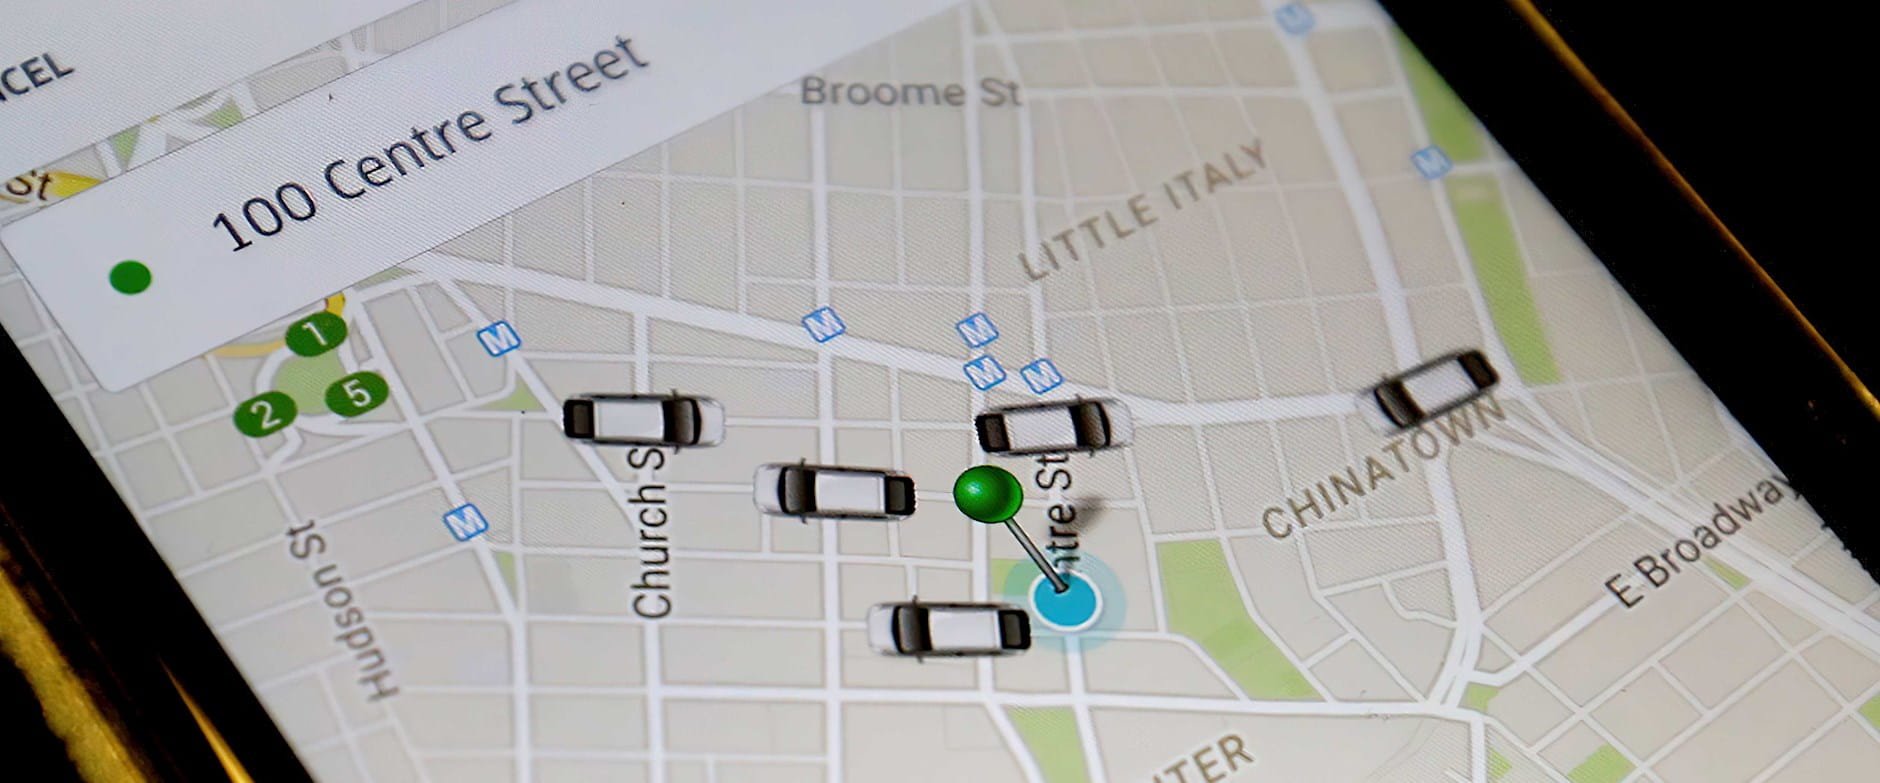 Mobile map of available Uber drivers